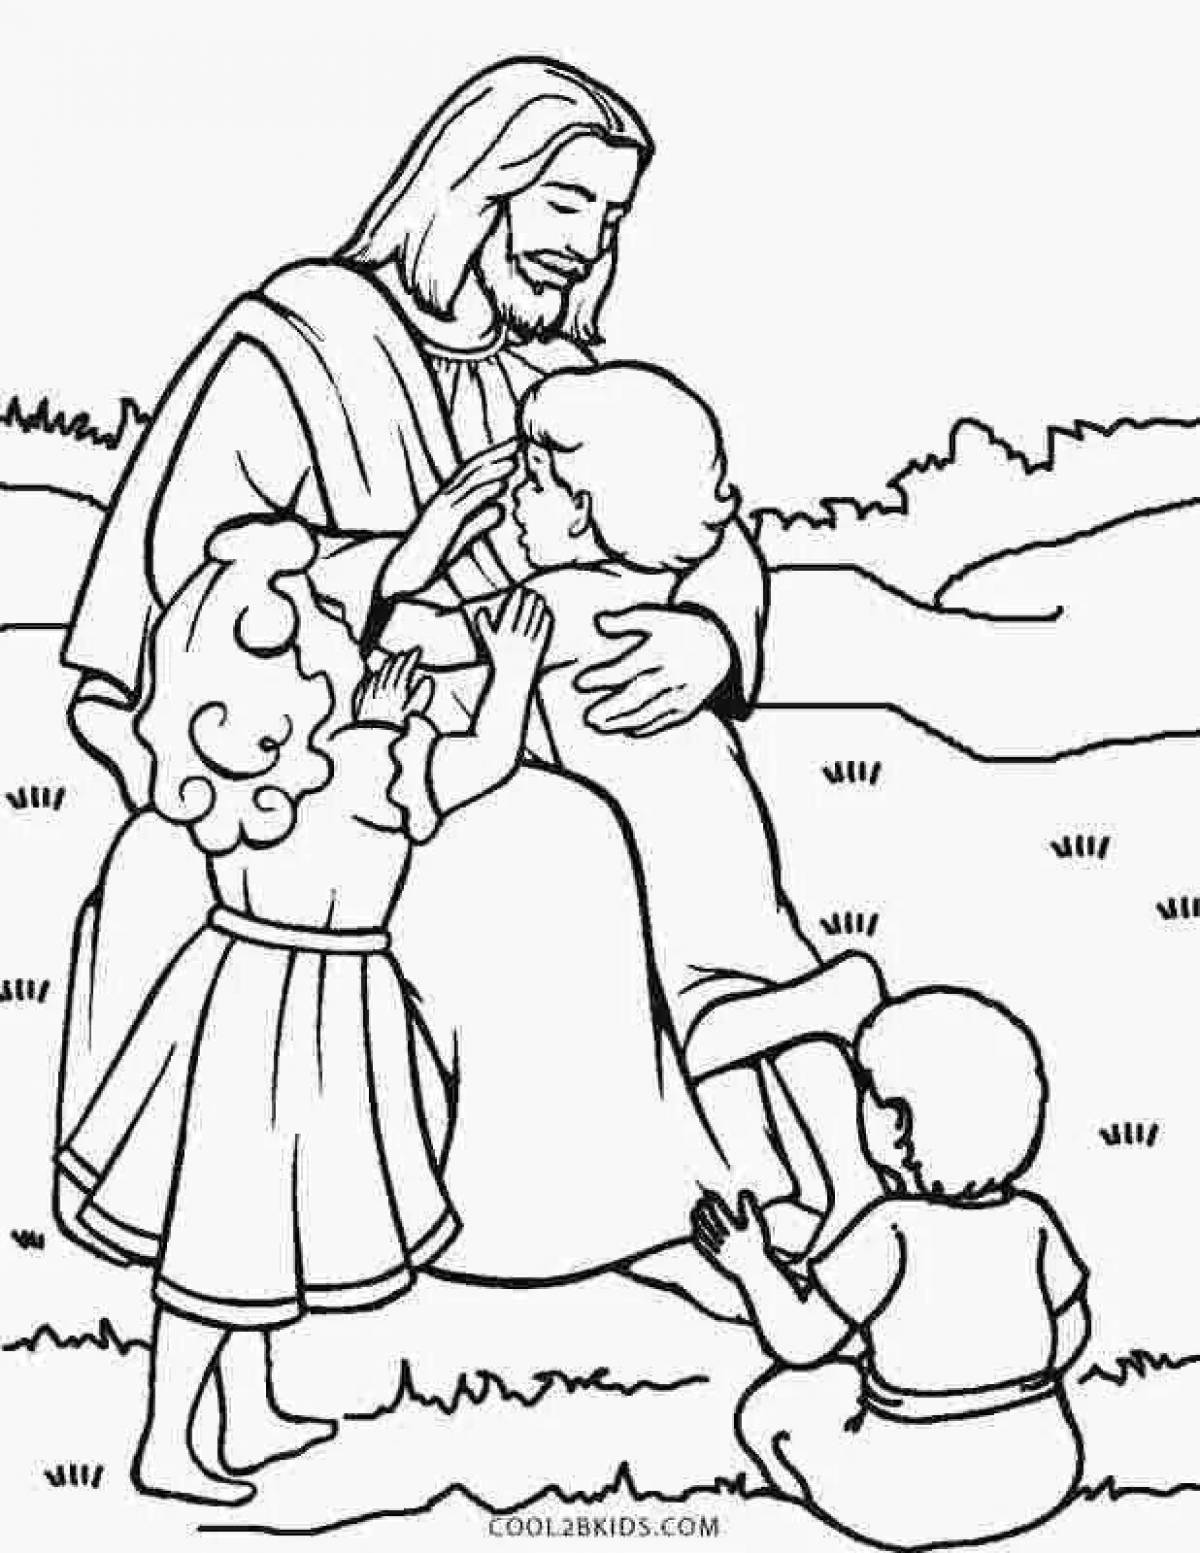 Majestic jesus coloring page